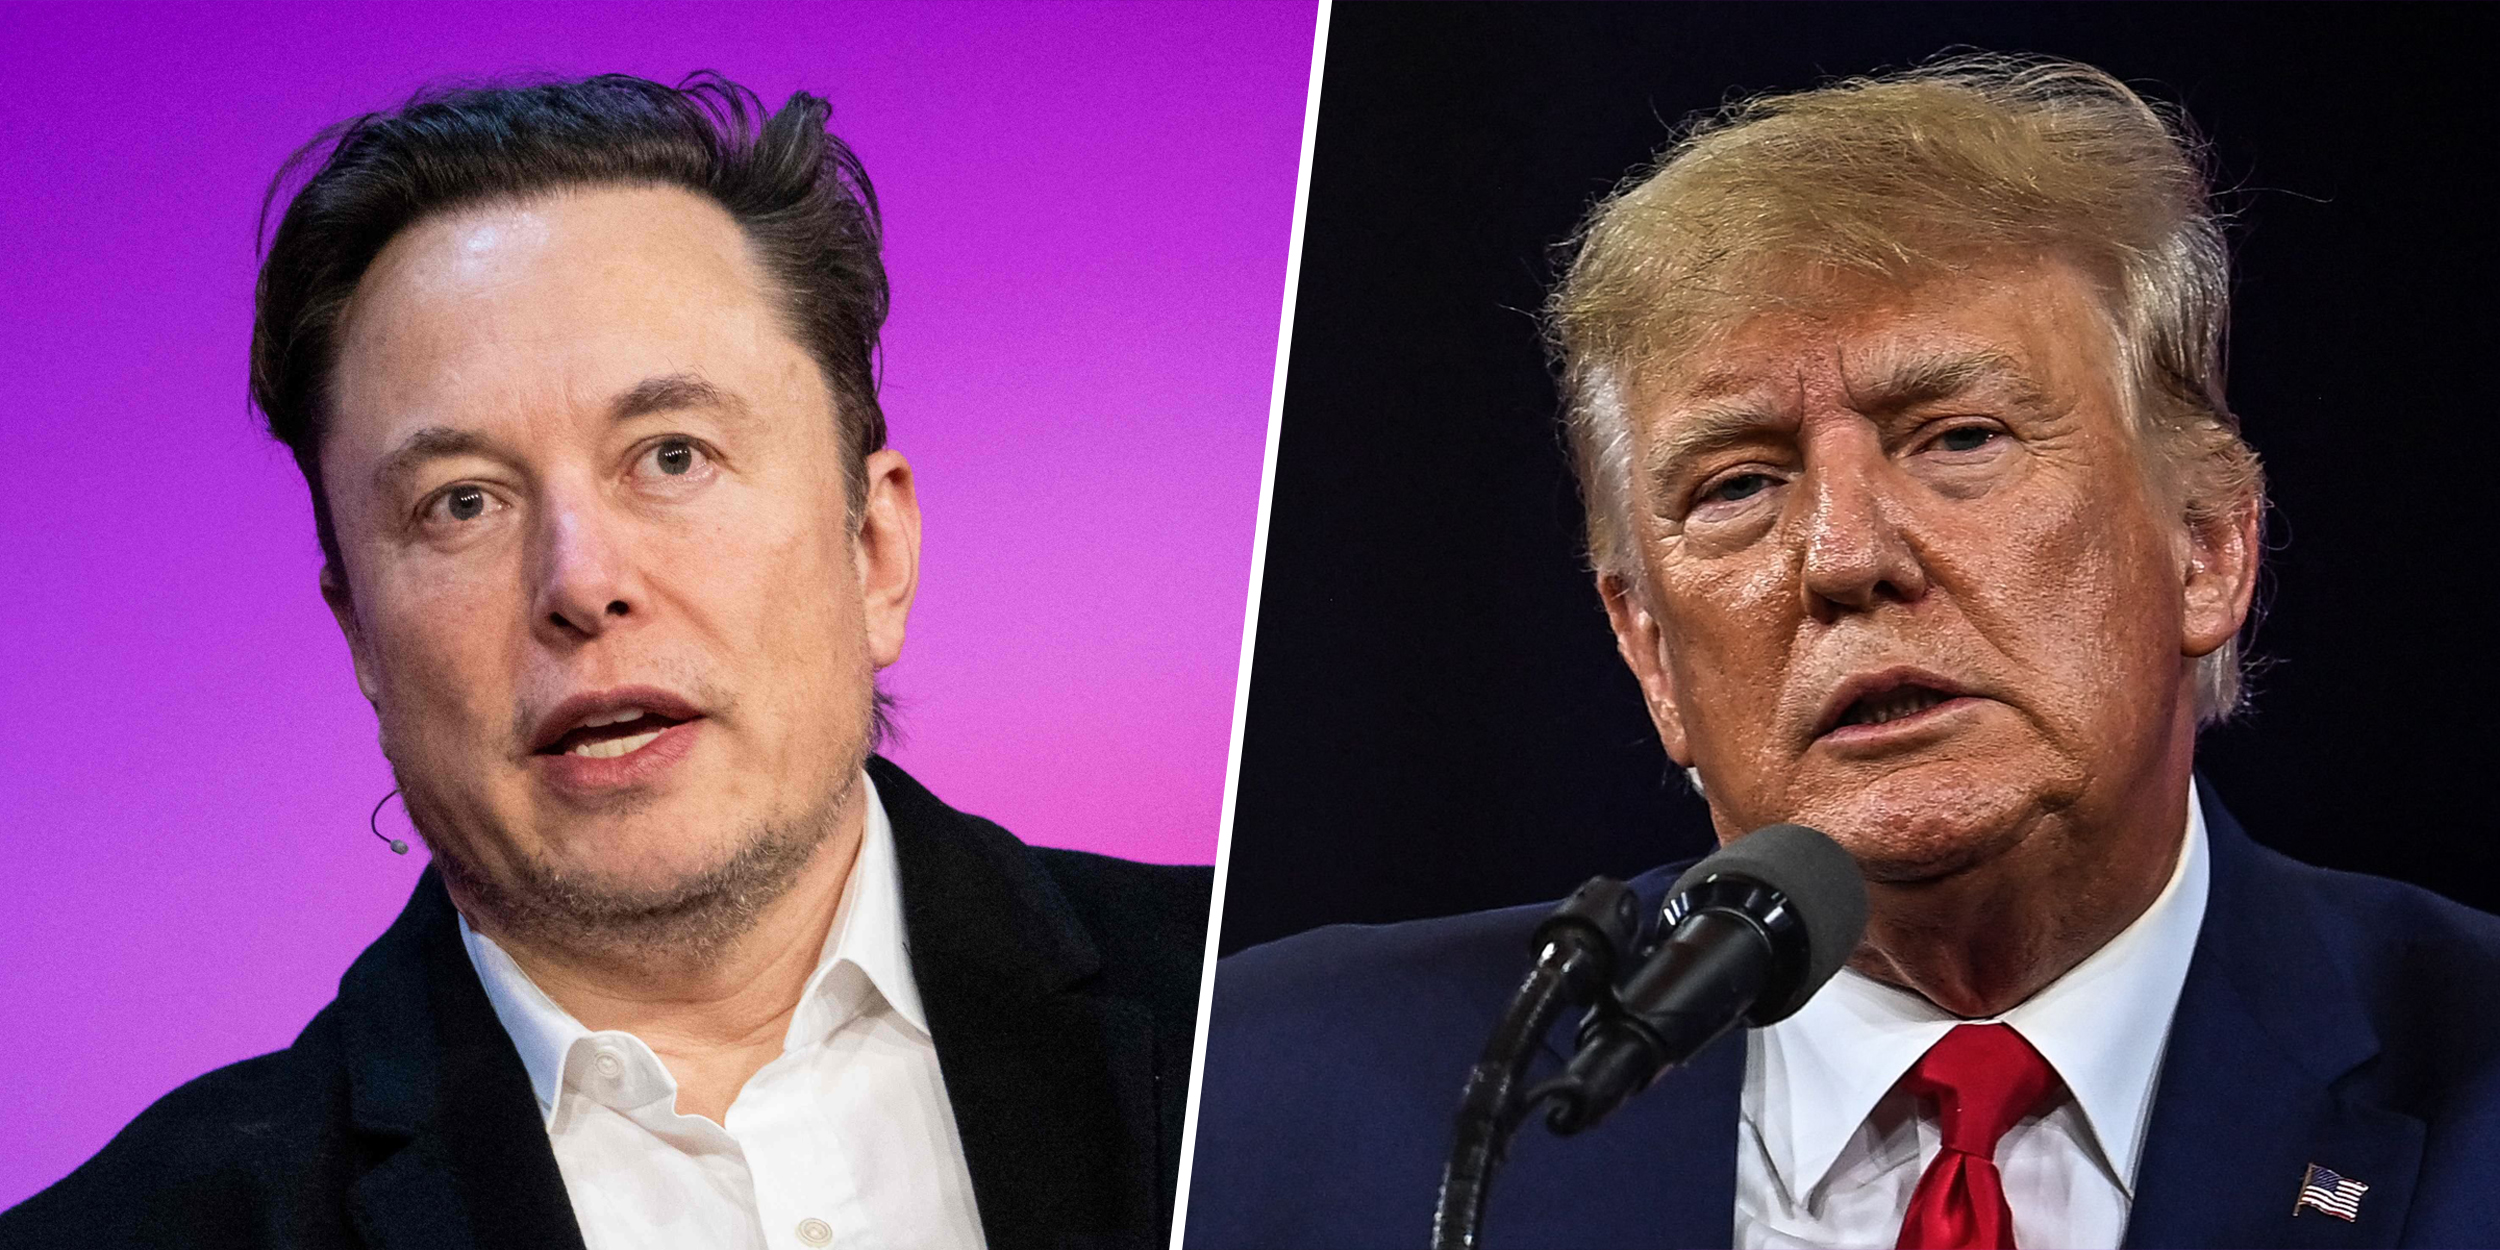 Elon Musk suggests he would reverse Donald Trump’s ban on Twitter